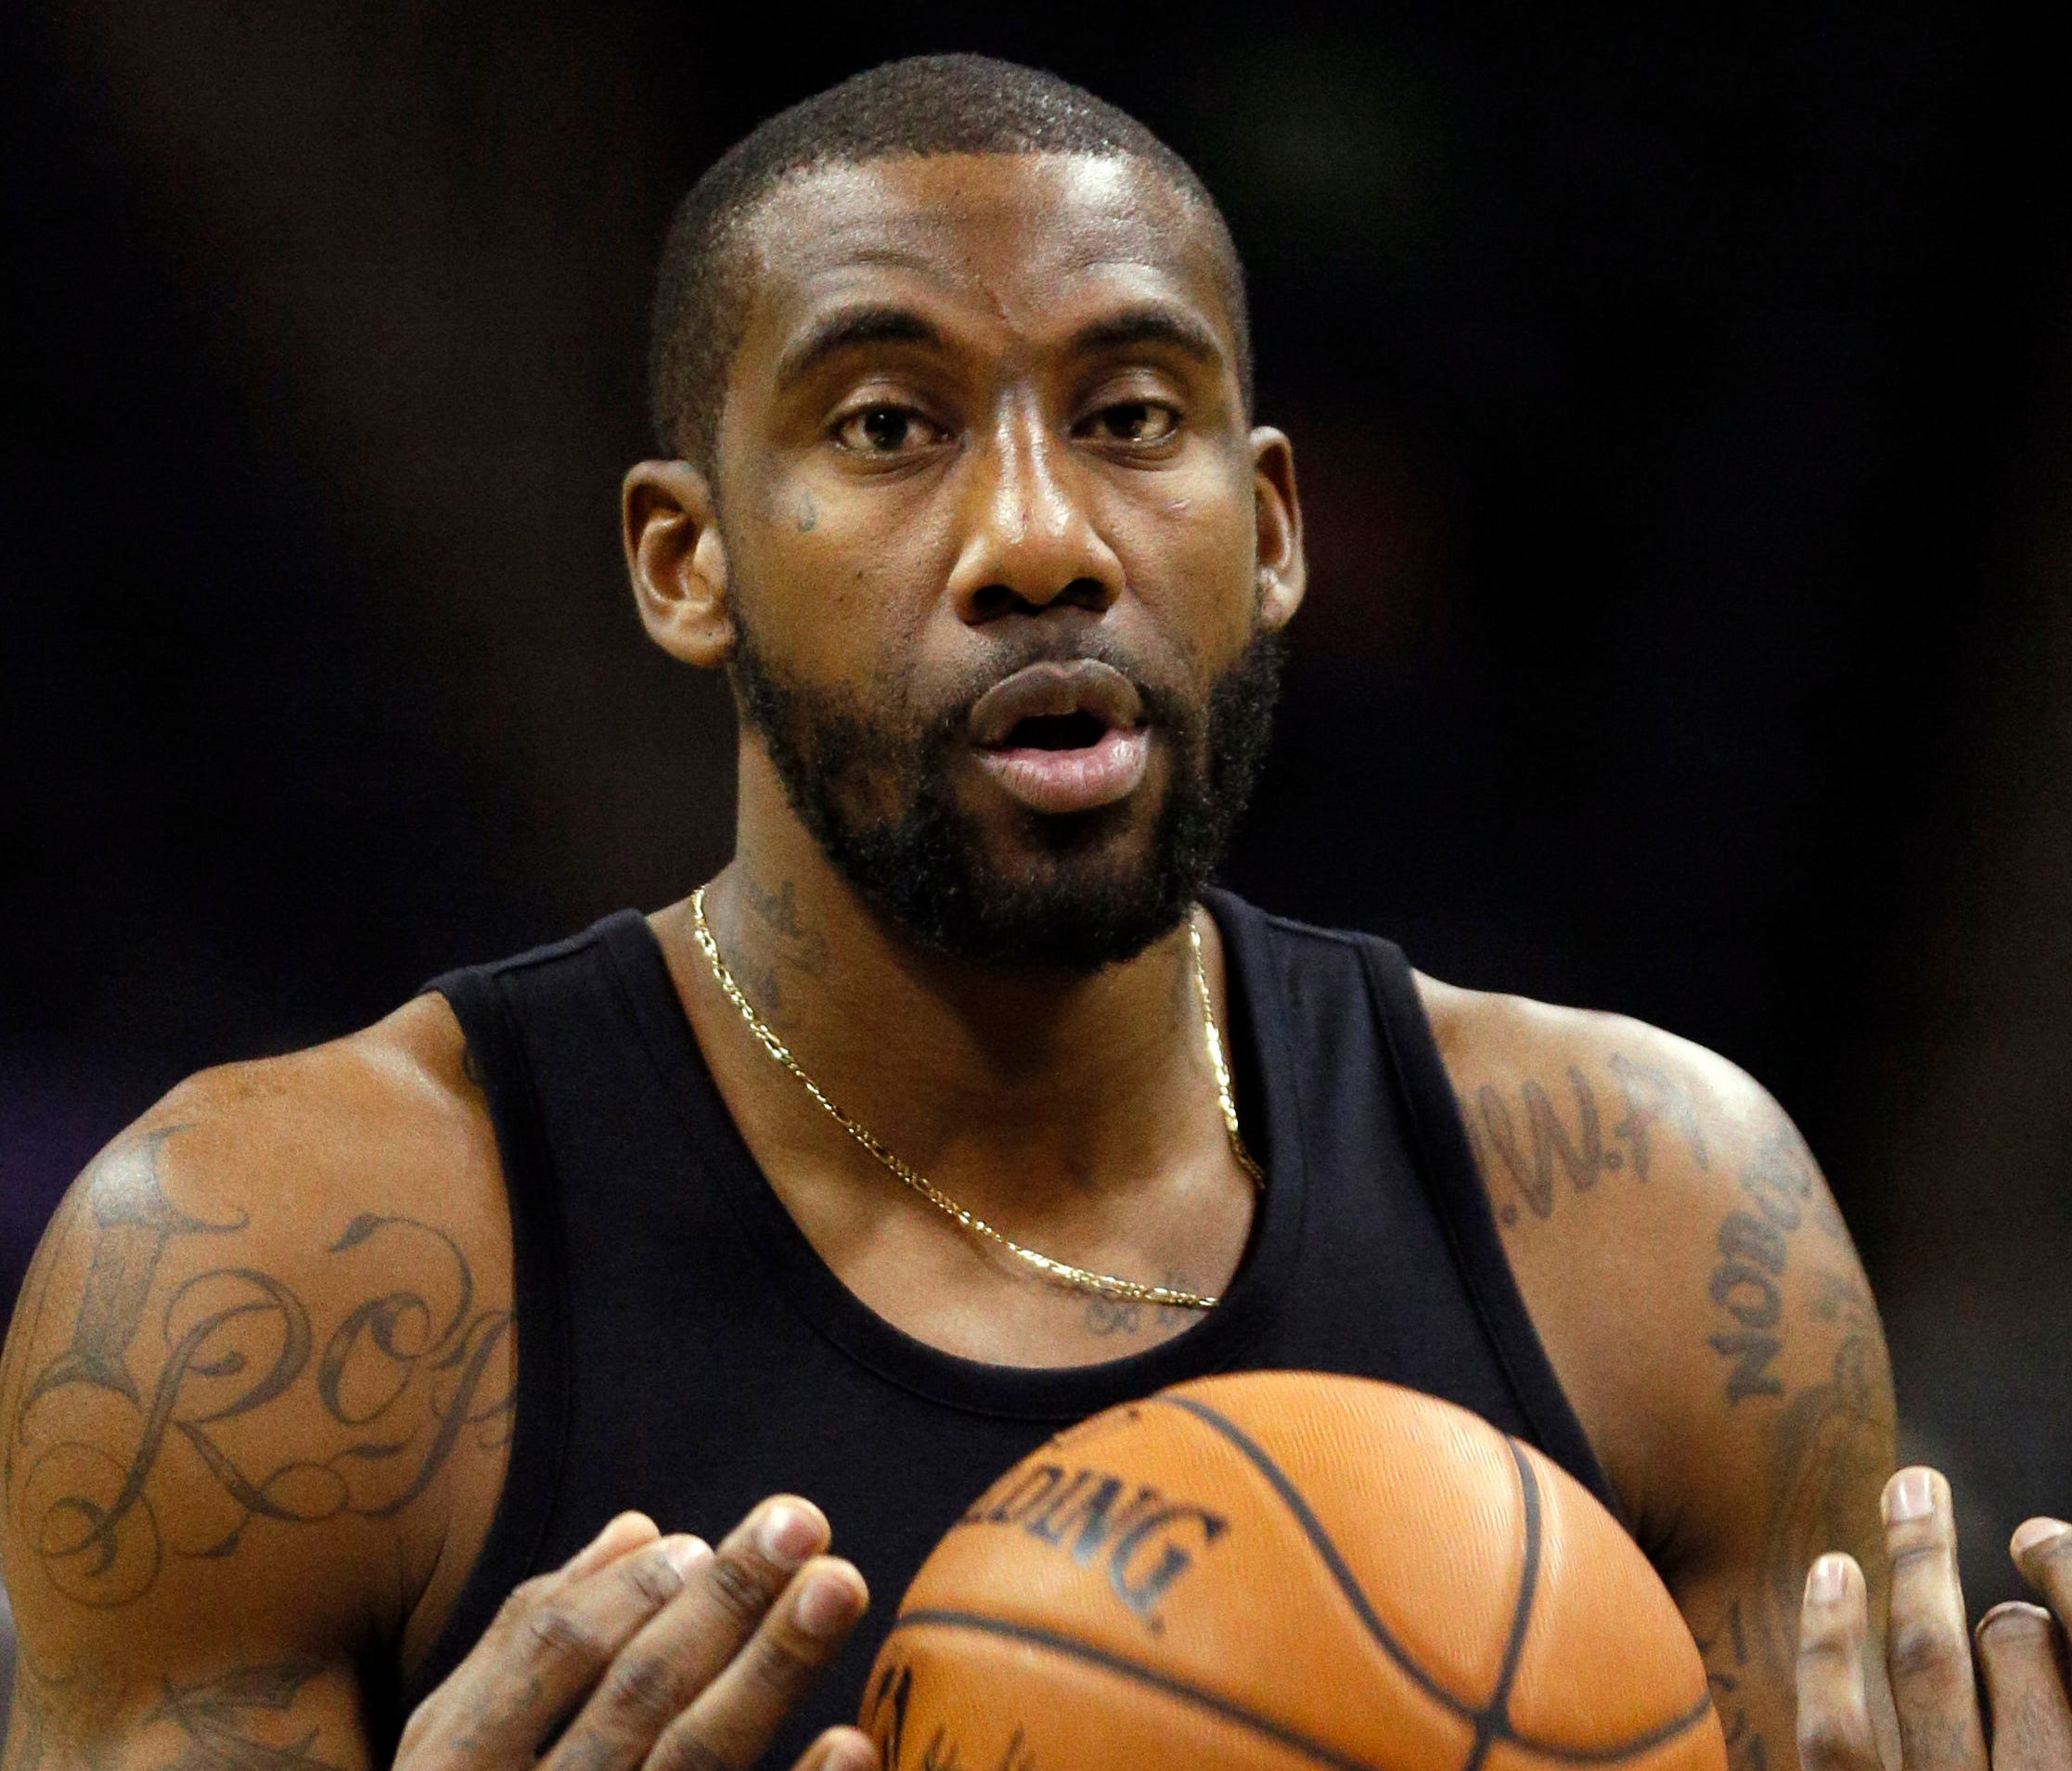 Former New York Knicks power forward Amar'e Stoudemire (1) warms up before a 2014 game.